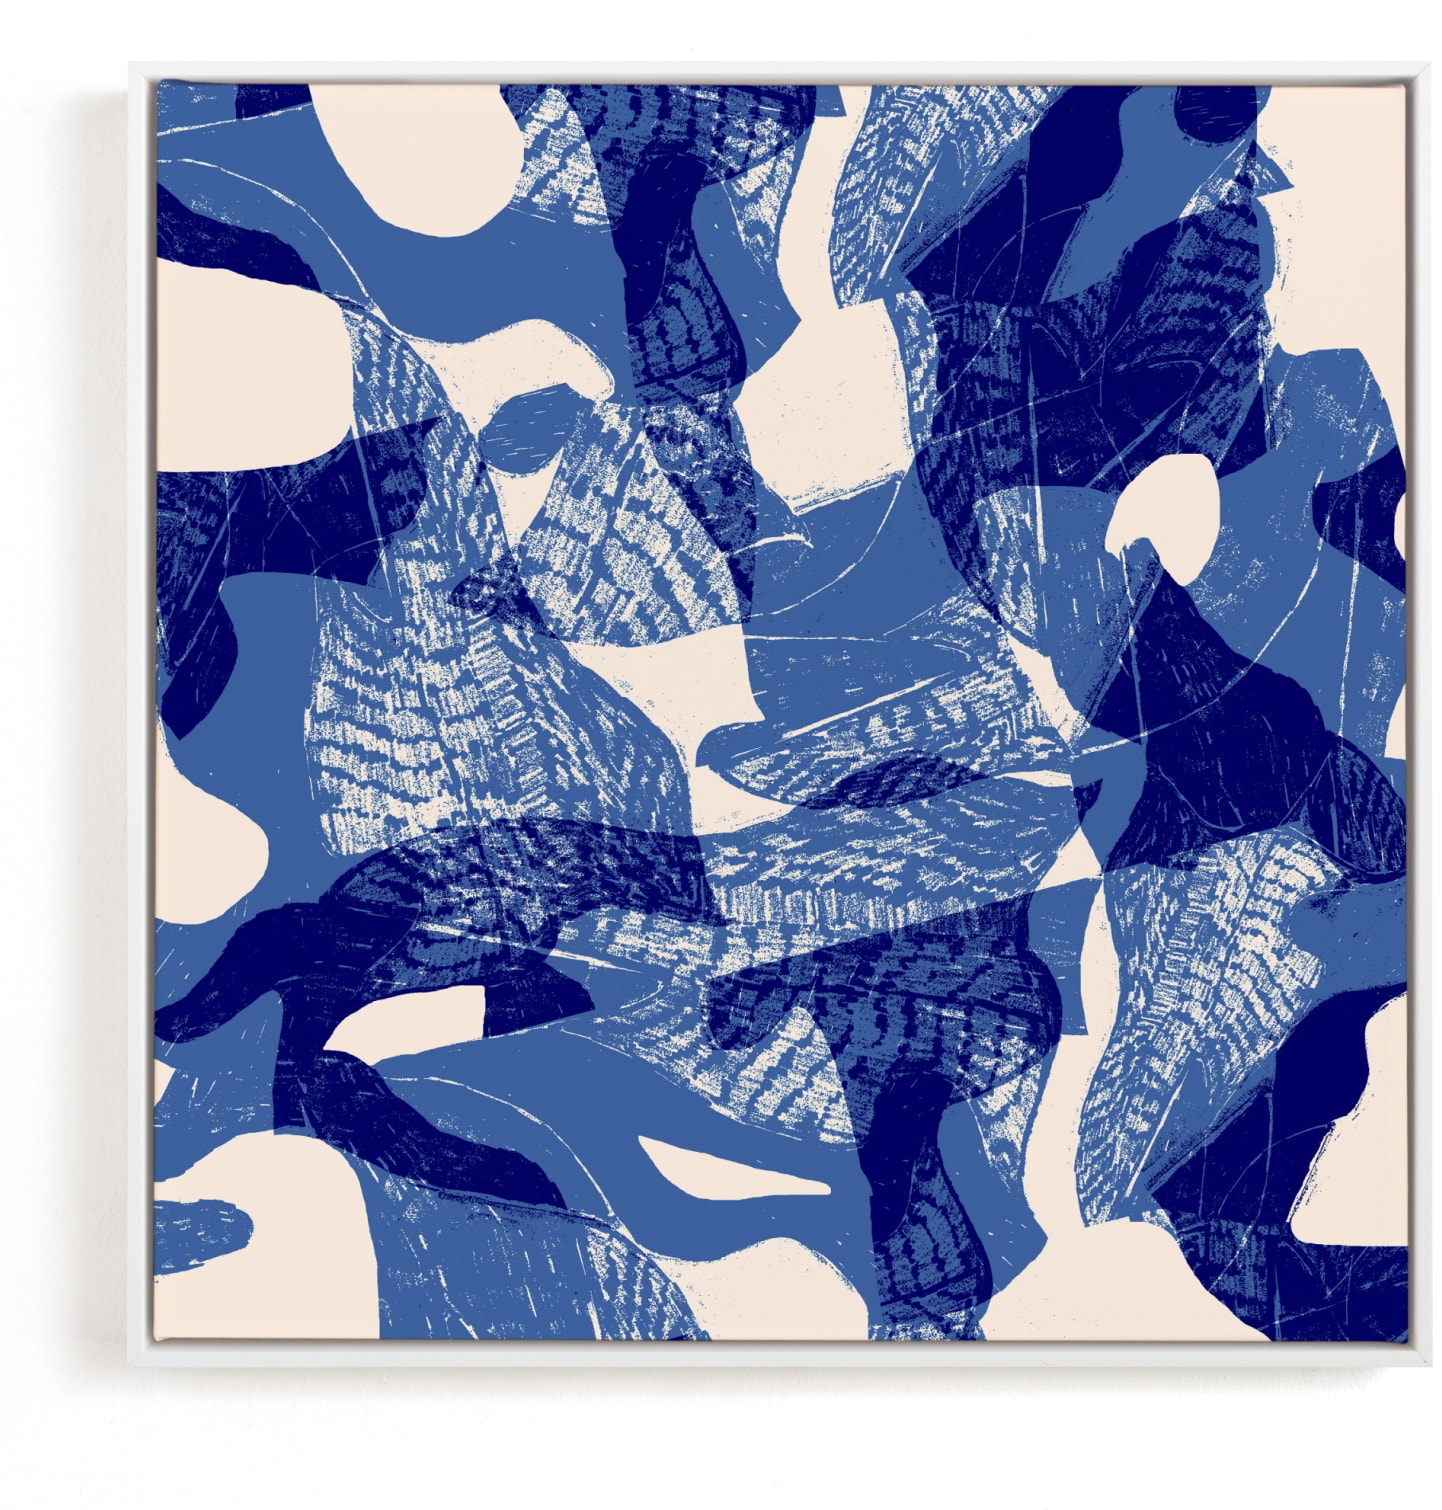 This is a blue art by Oana Prints called Bird flight.